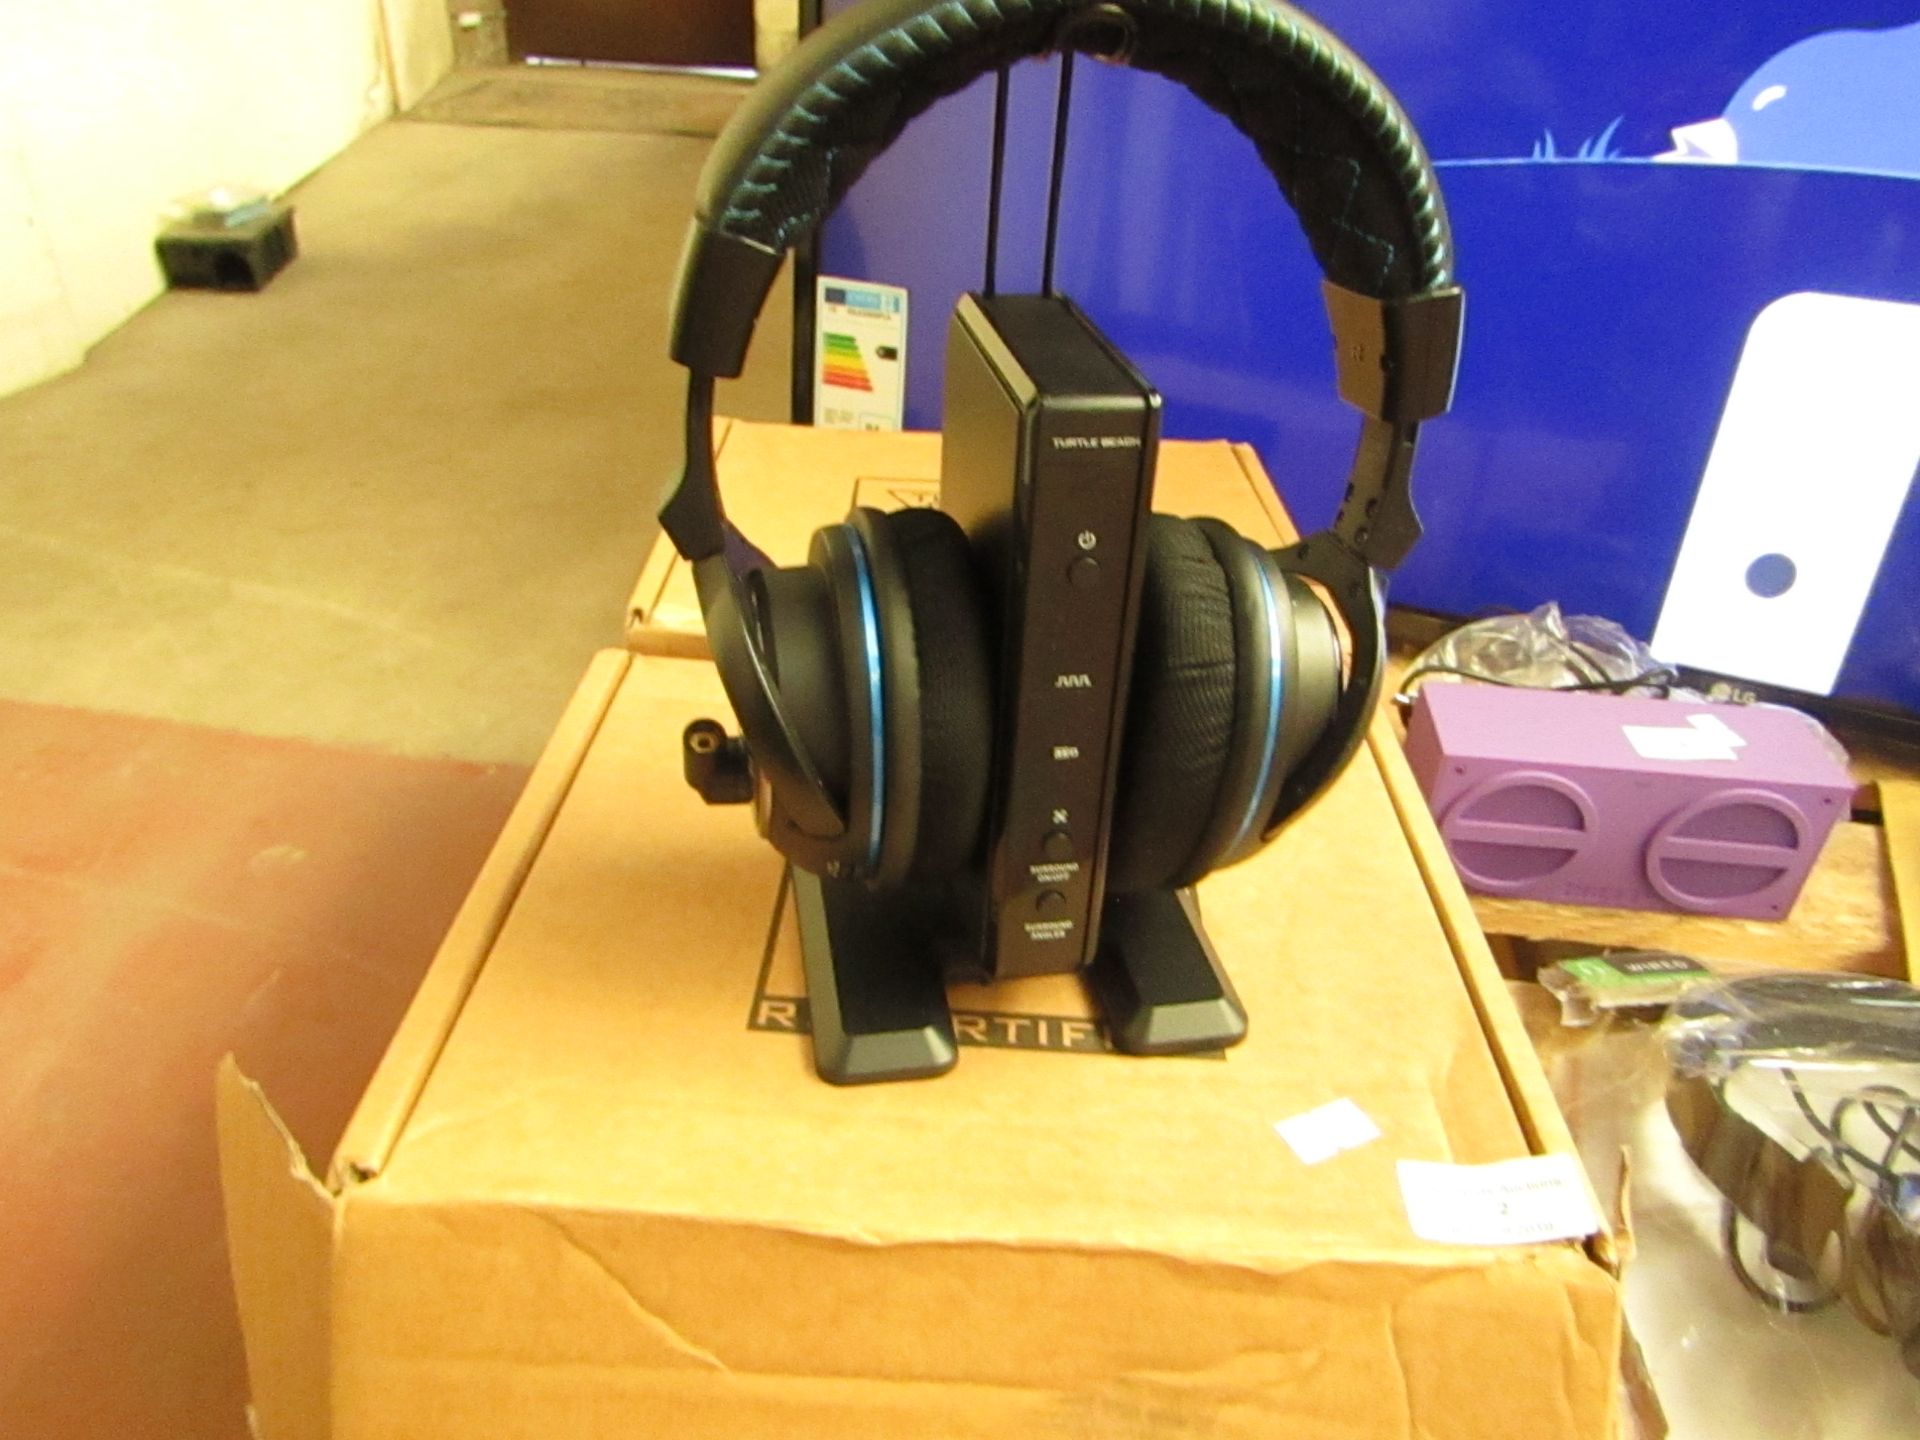 Turtle Beach gaming headset, untested and boxed.